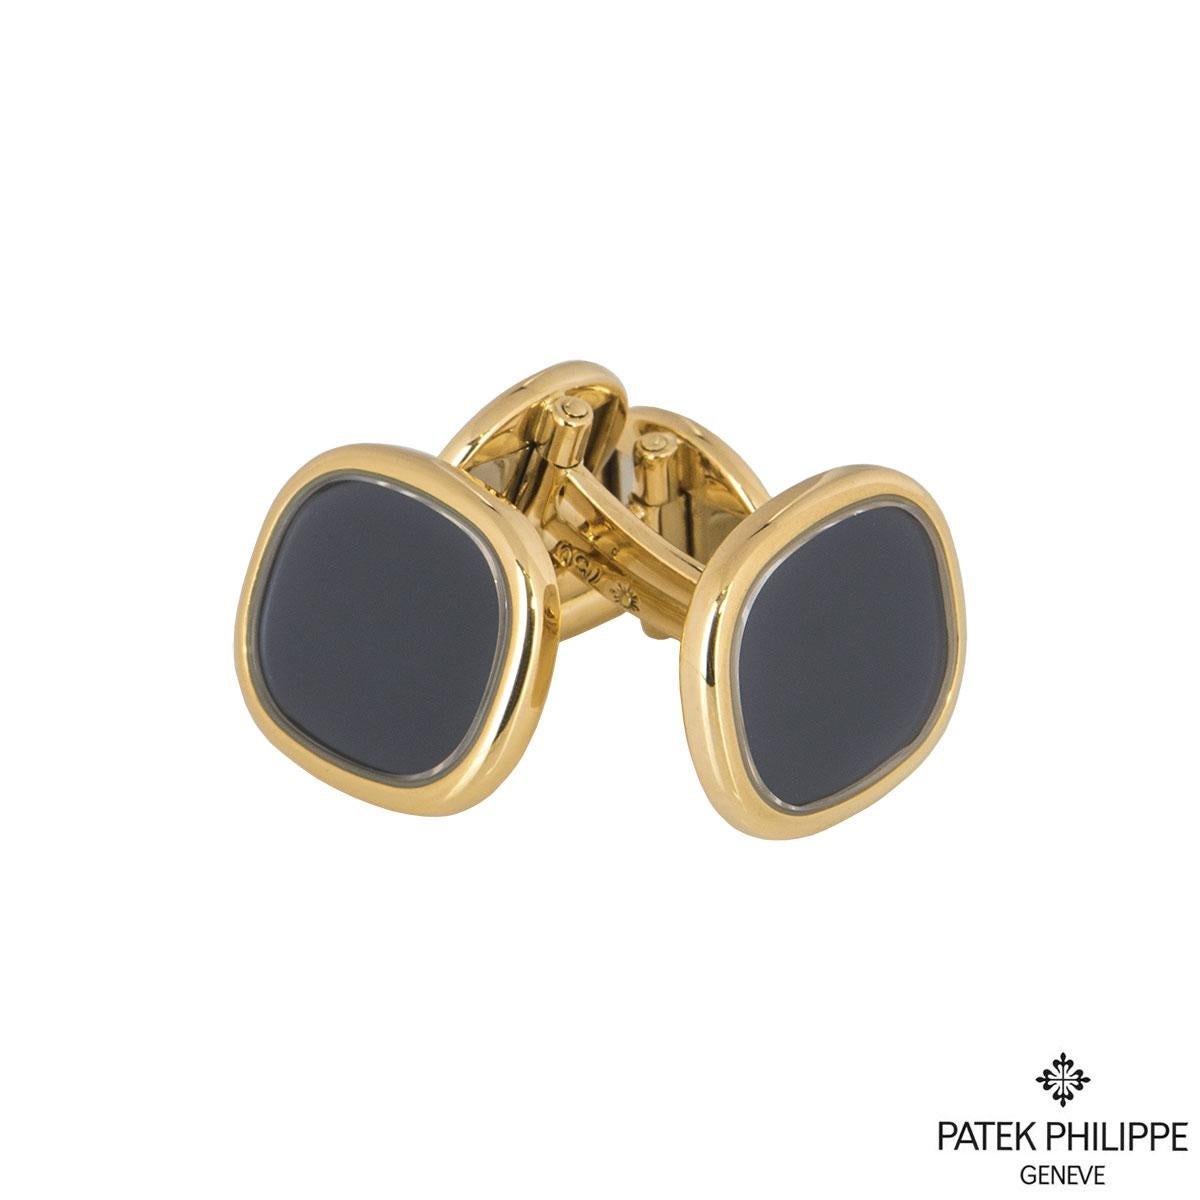 A pair of 18k yellow gold by Patek Philippe from the Ellipse collection. The cufflinks are set to the front with a blue accent dial with a polished yellow gold surround, measuring 1.40cm in height and 1.60cm in width. The cufflinks have T-bar